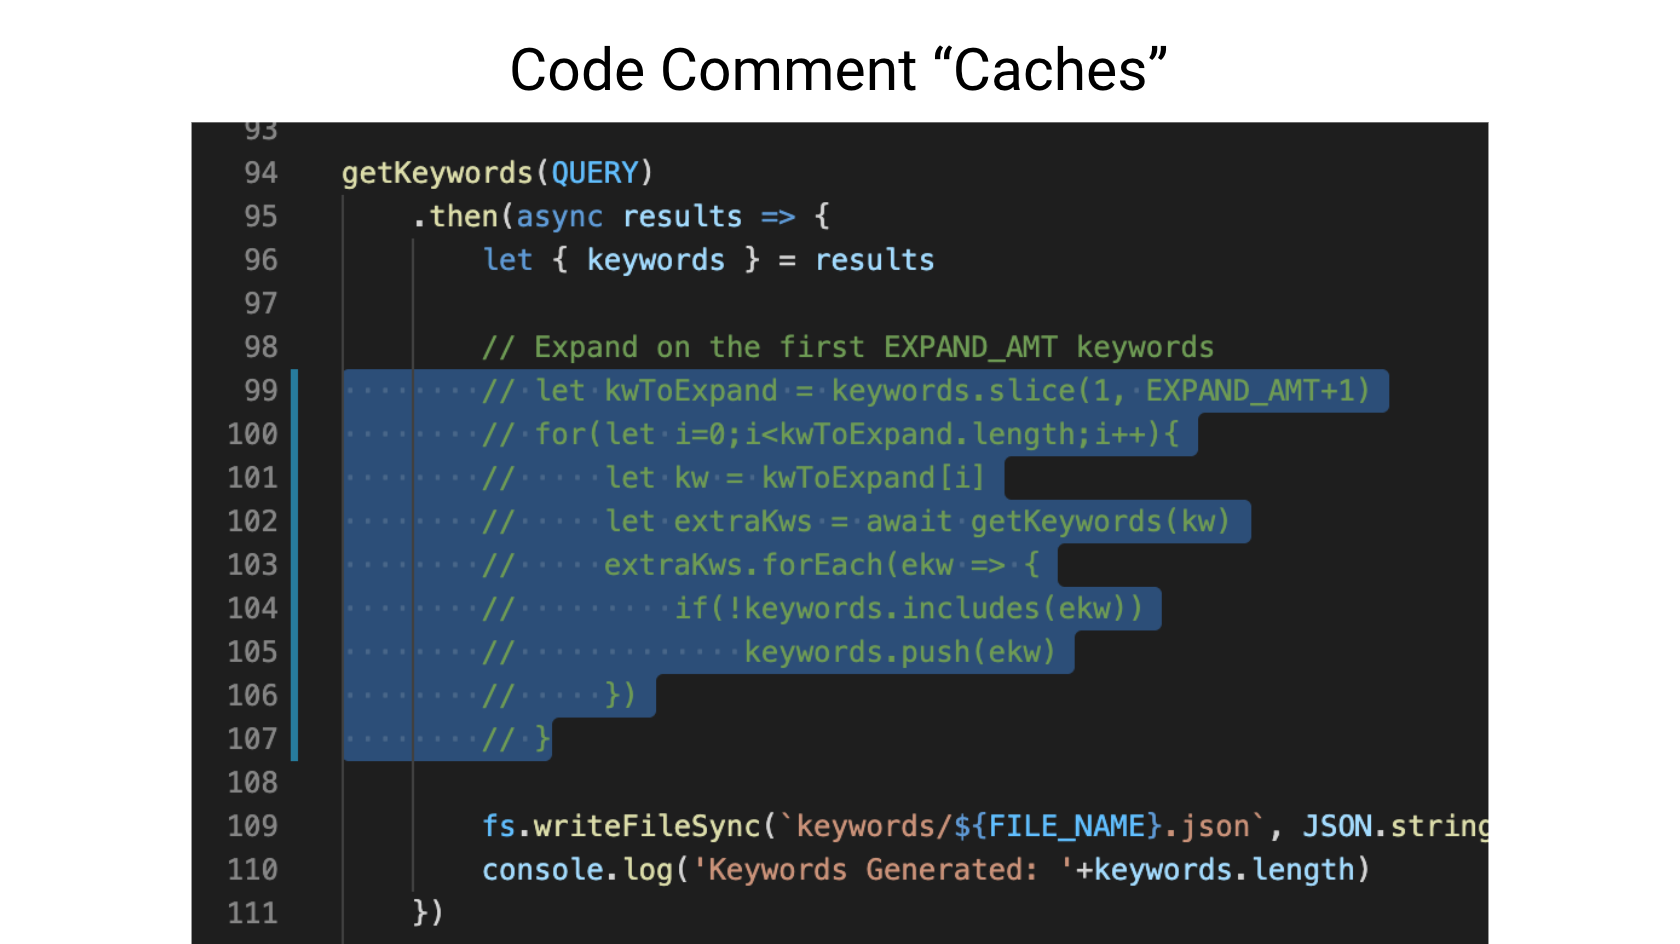 Level Up Your Code Quality As A Software Engineer [Part 20] - Code Comment Caches